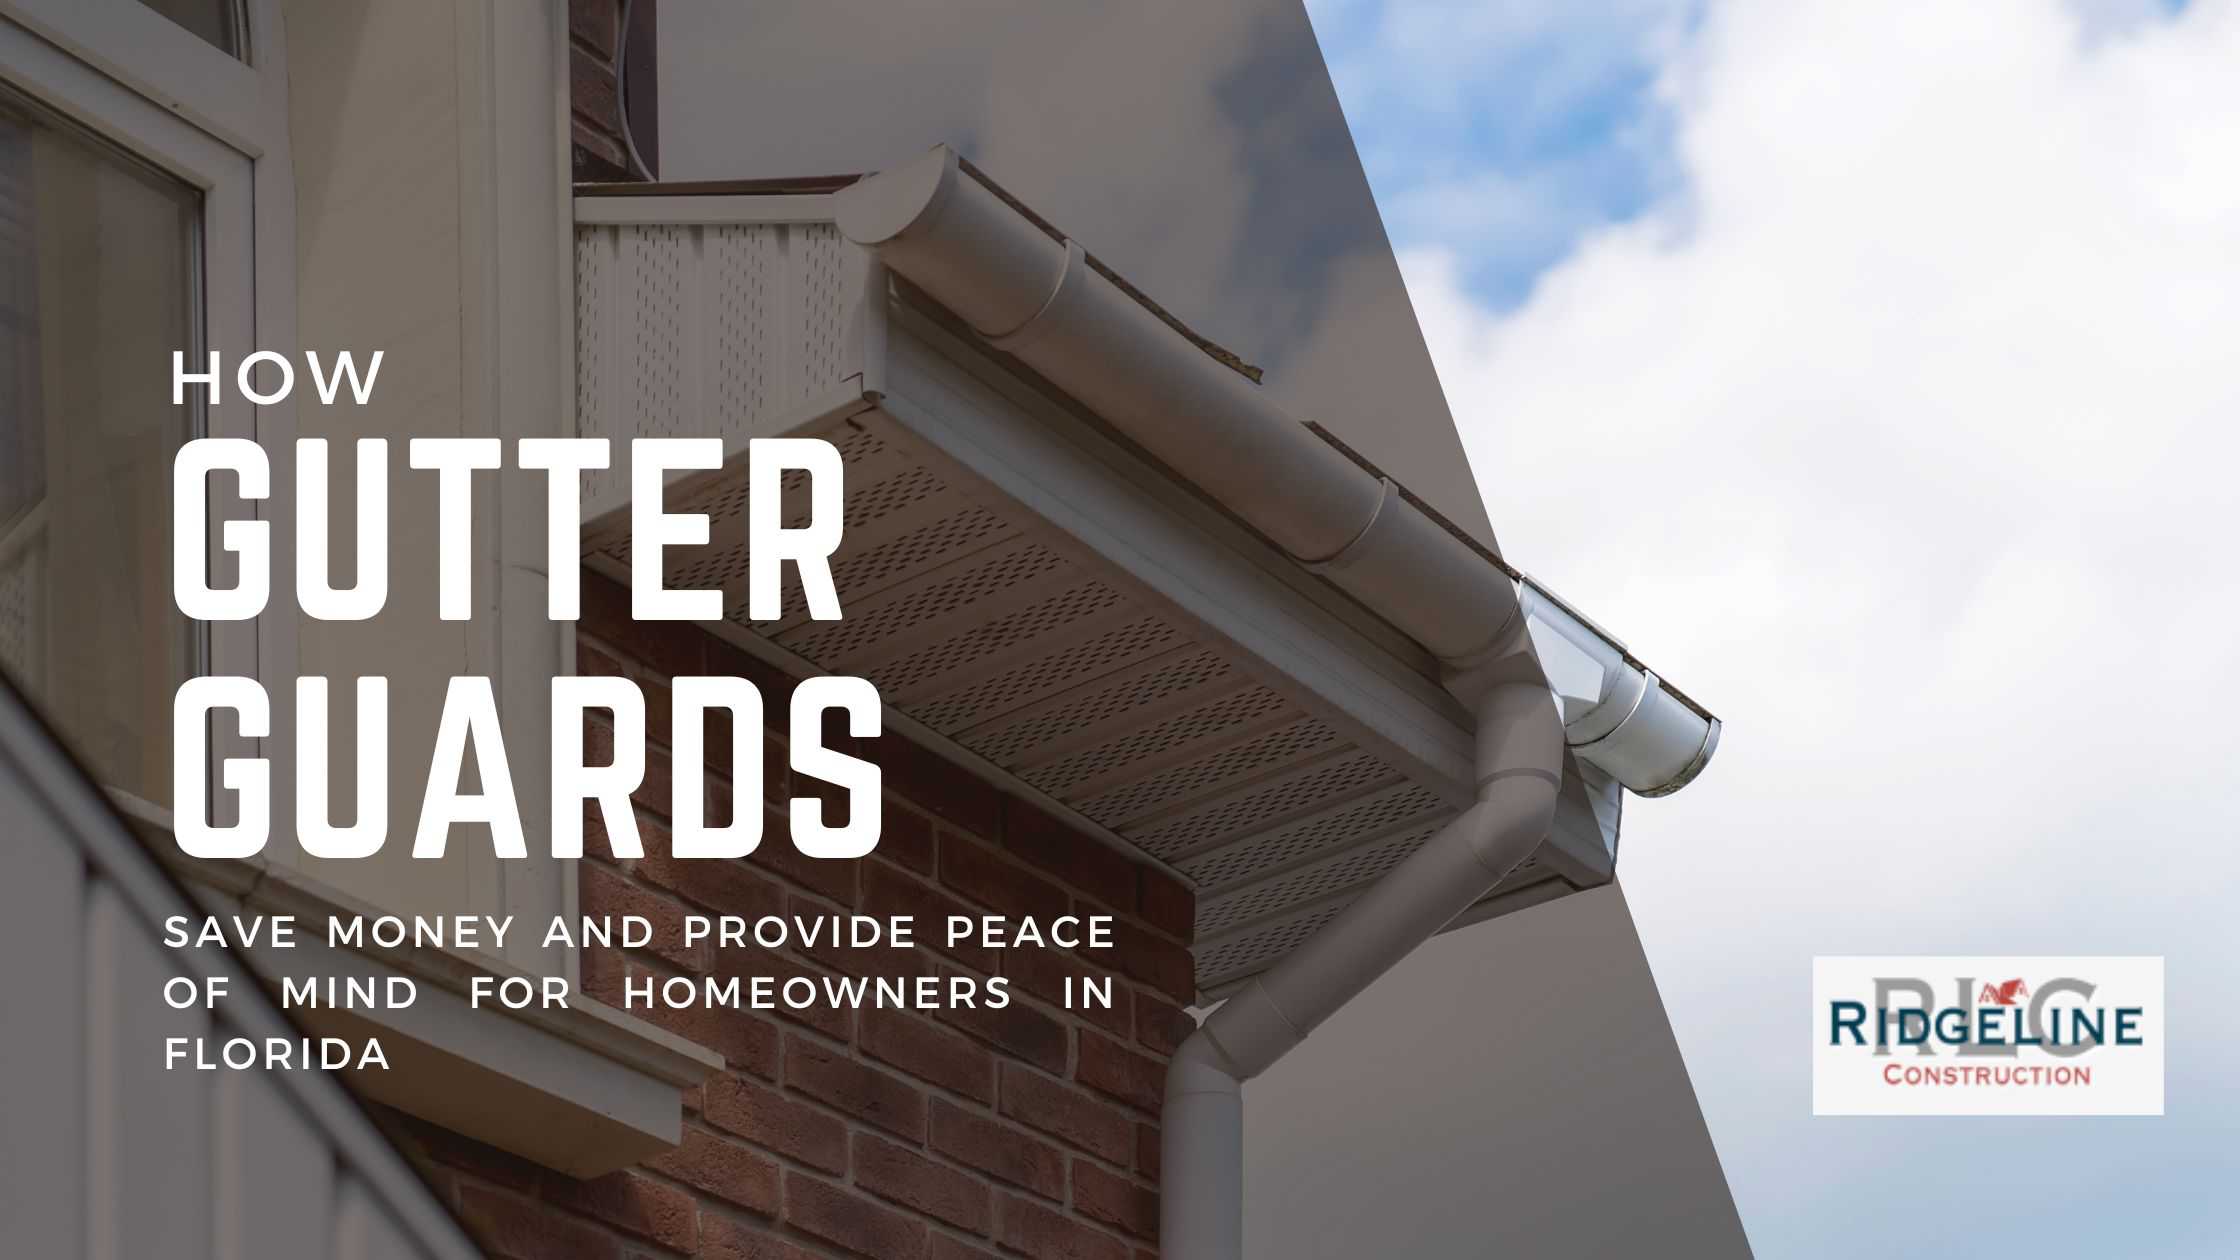 Properly installed gutter guards protect your home, saving you time and money.